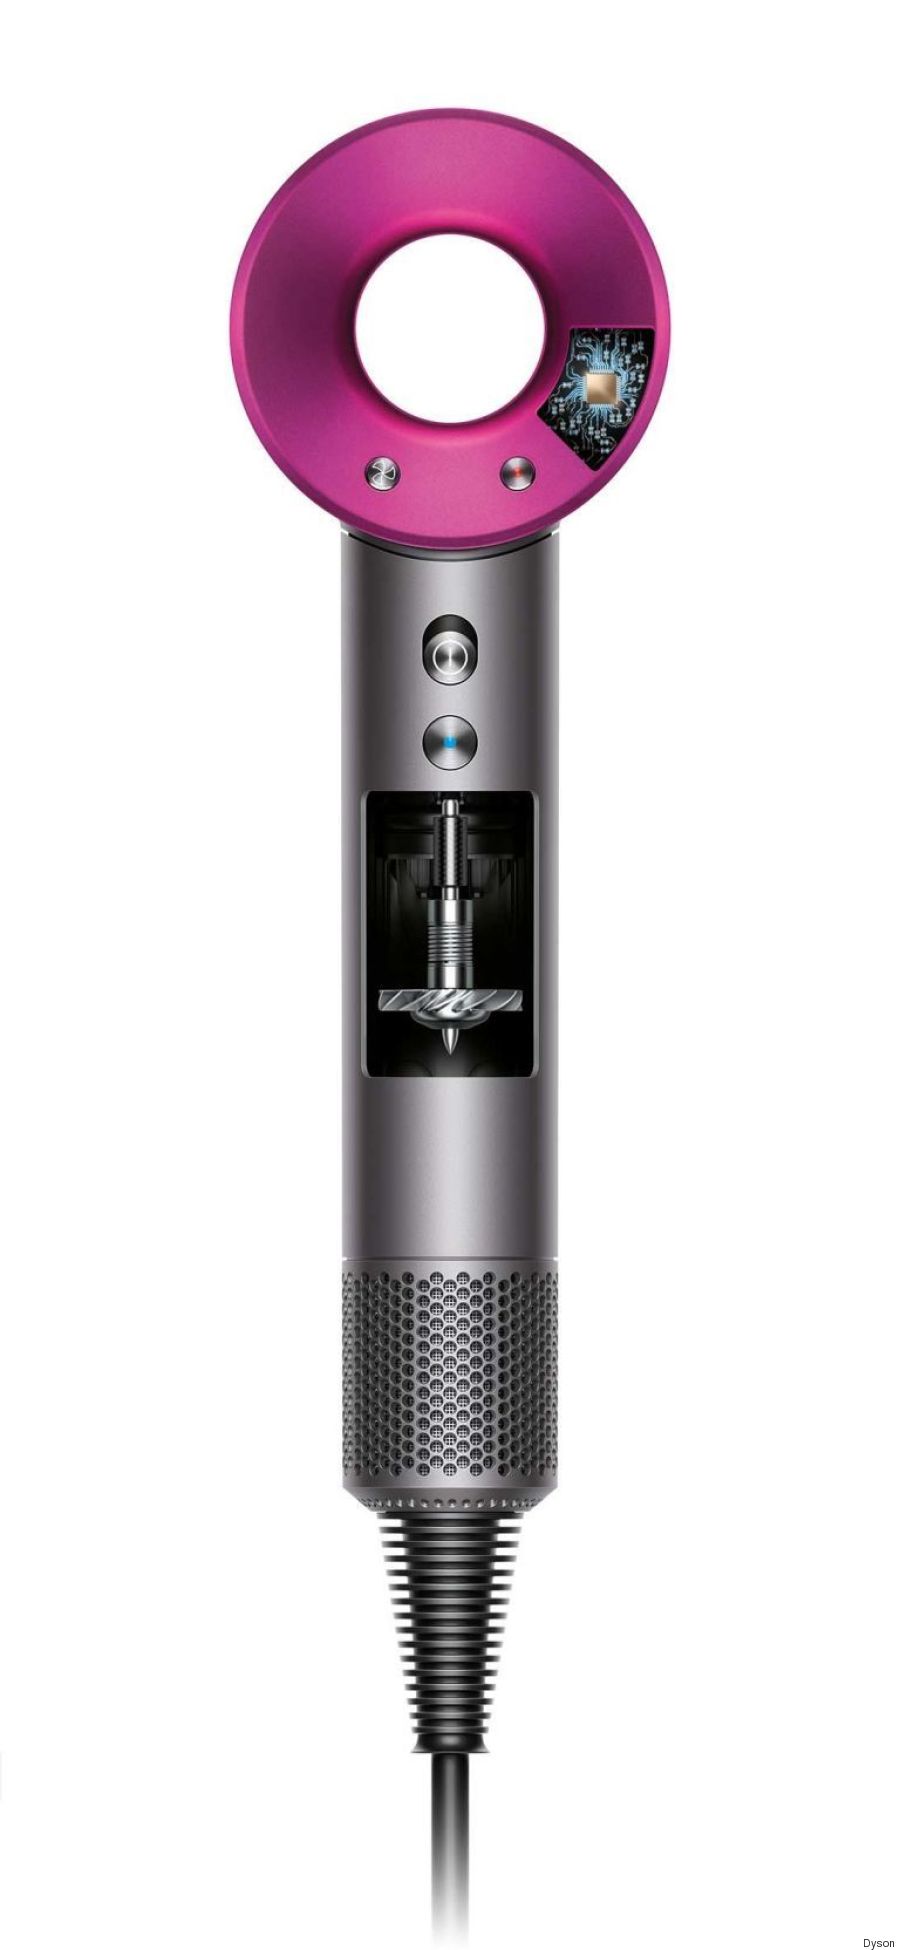 Dyson Releases First Ever Beauty Product: A $500 Supersonic Hair Dryer